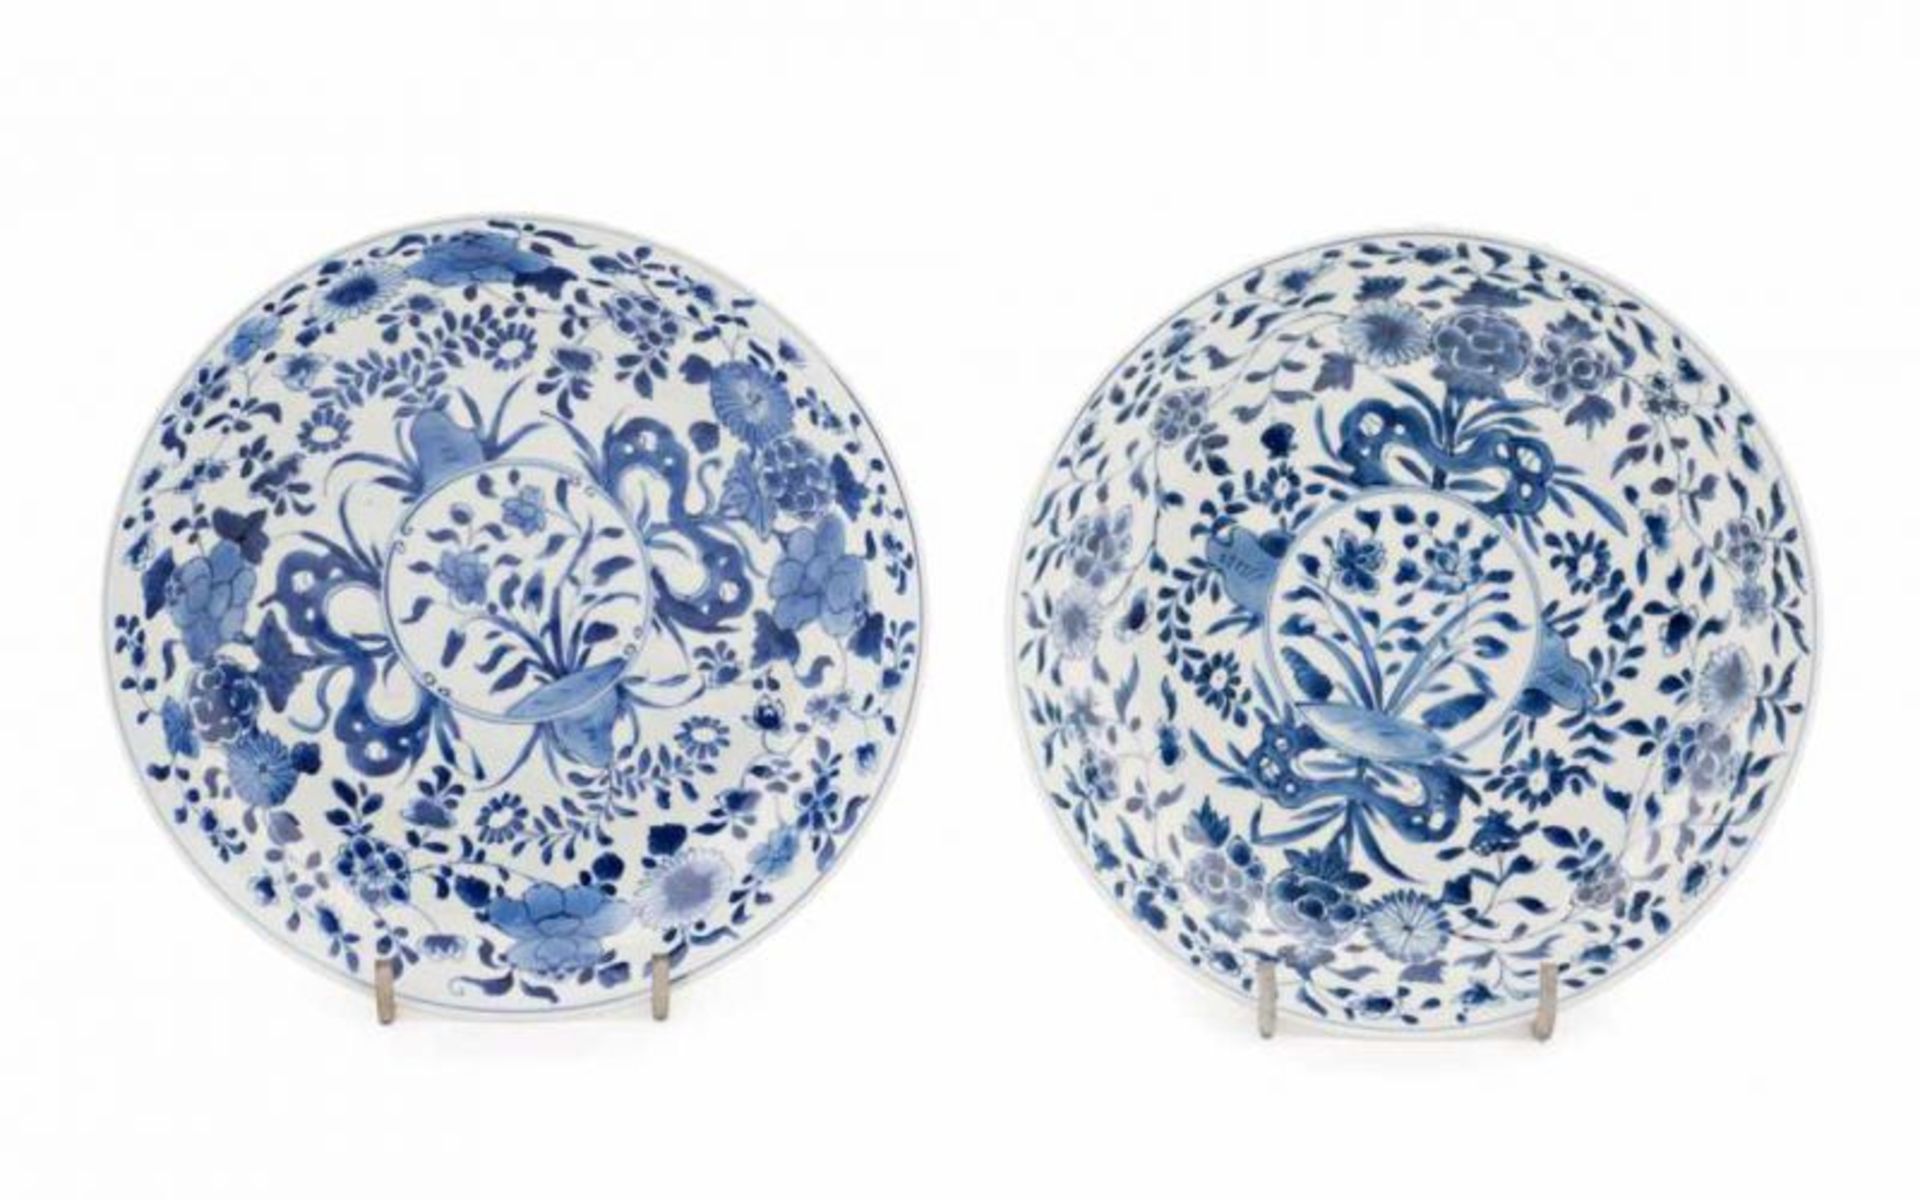 Two Chinese Kangxi porcelain plates, late 17th-early 18th Century 28 cm diam